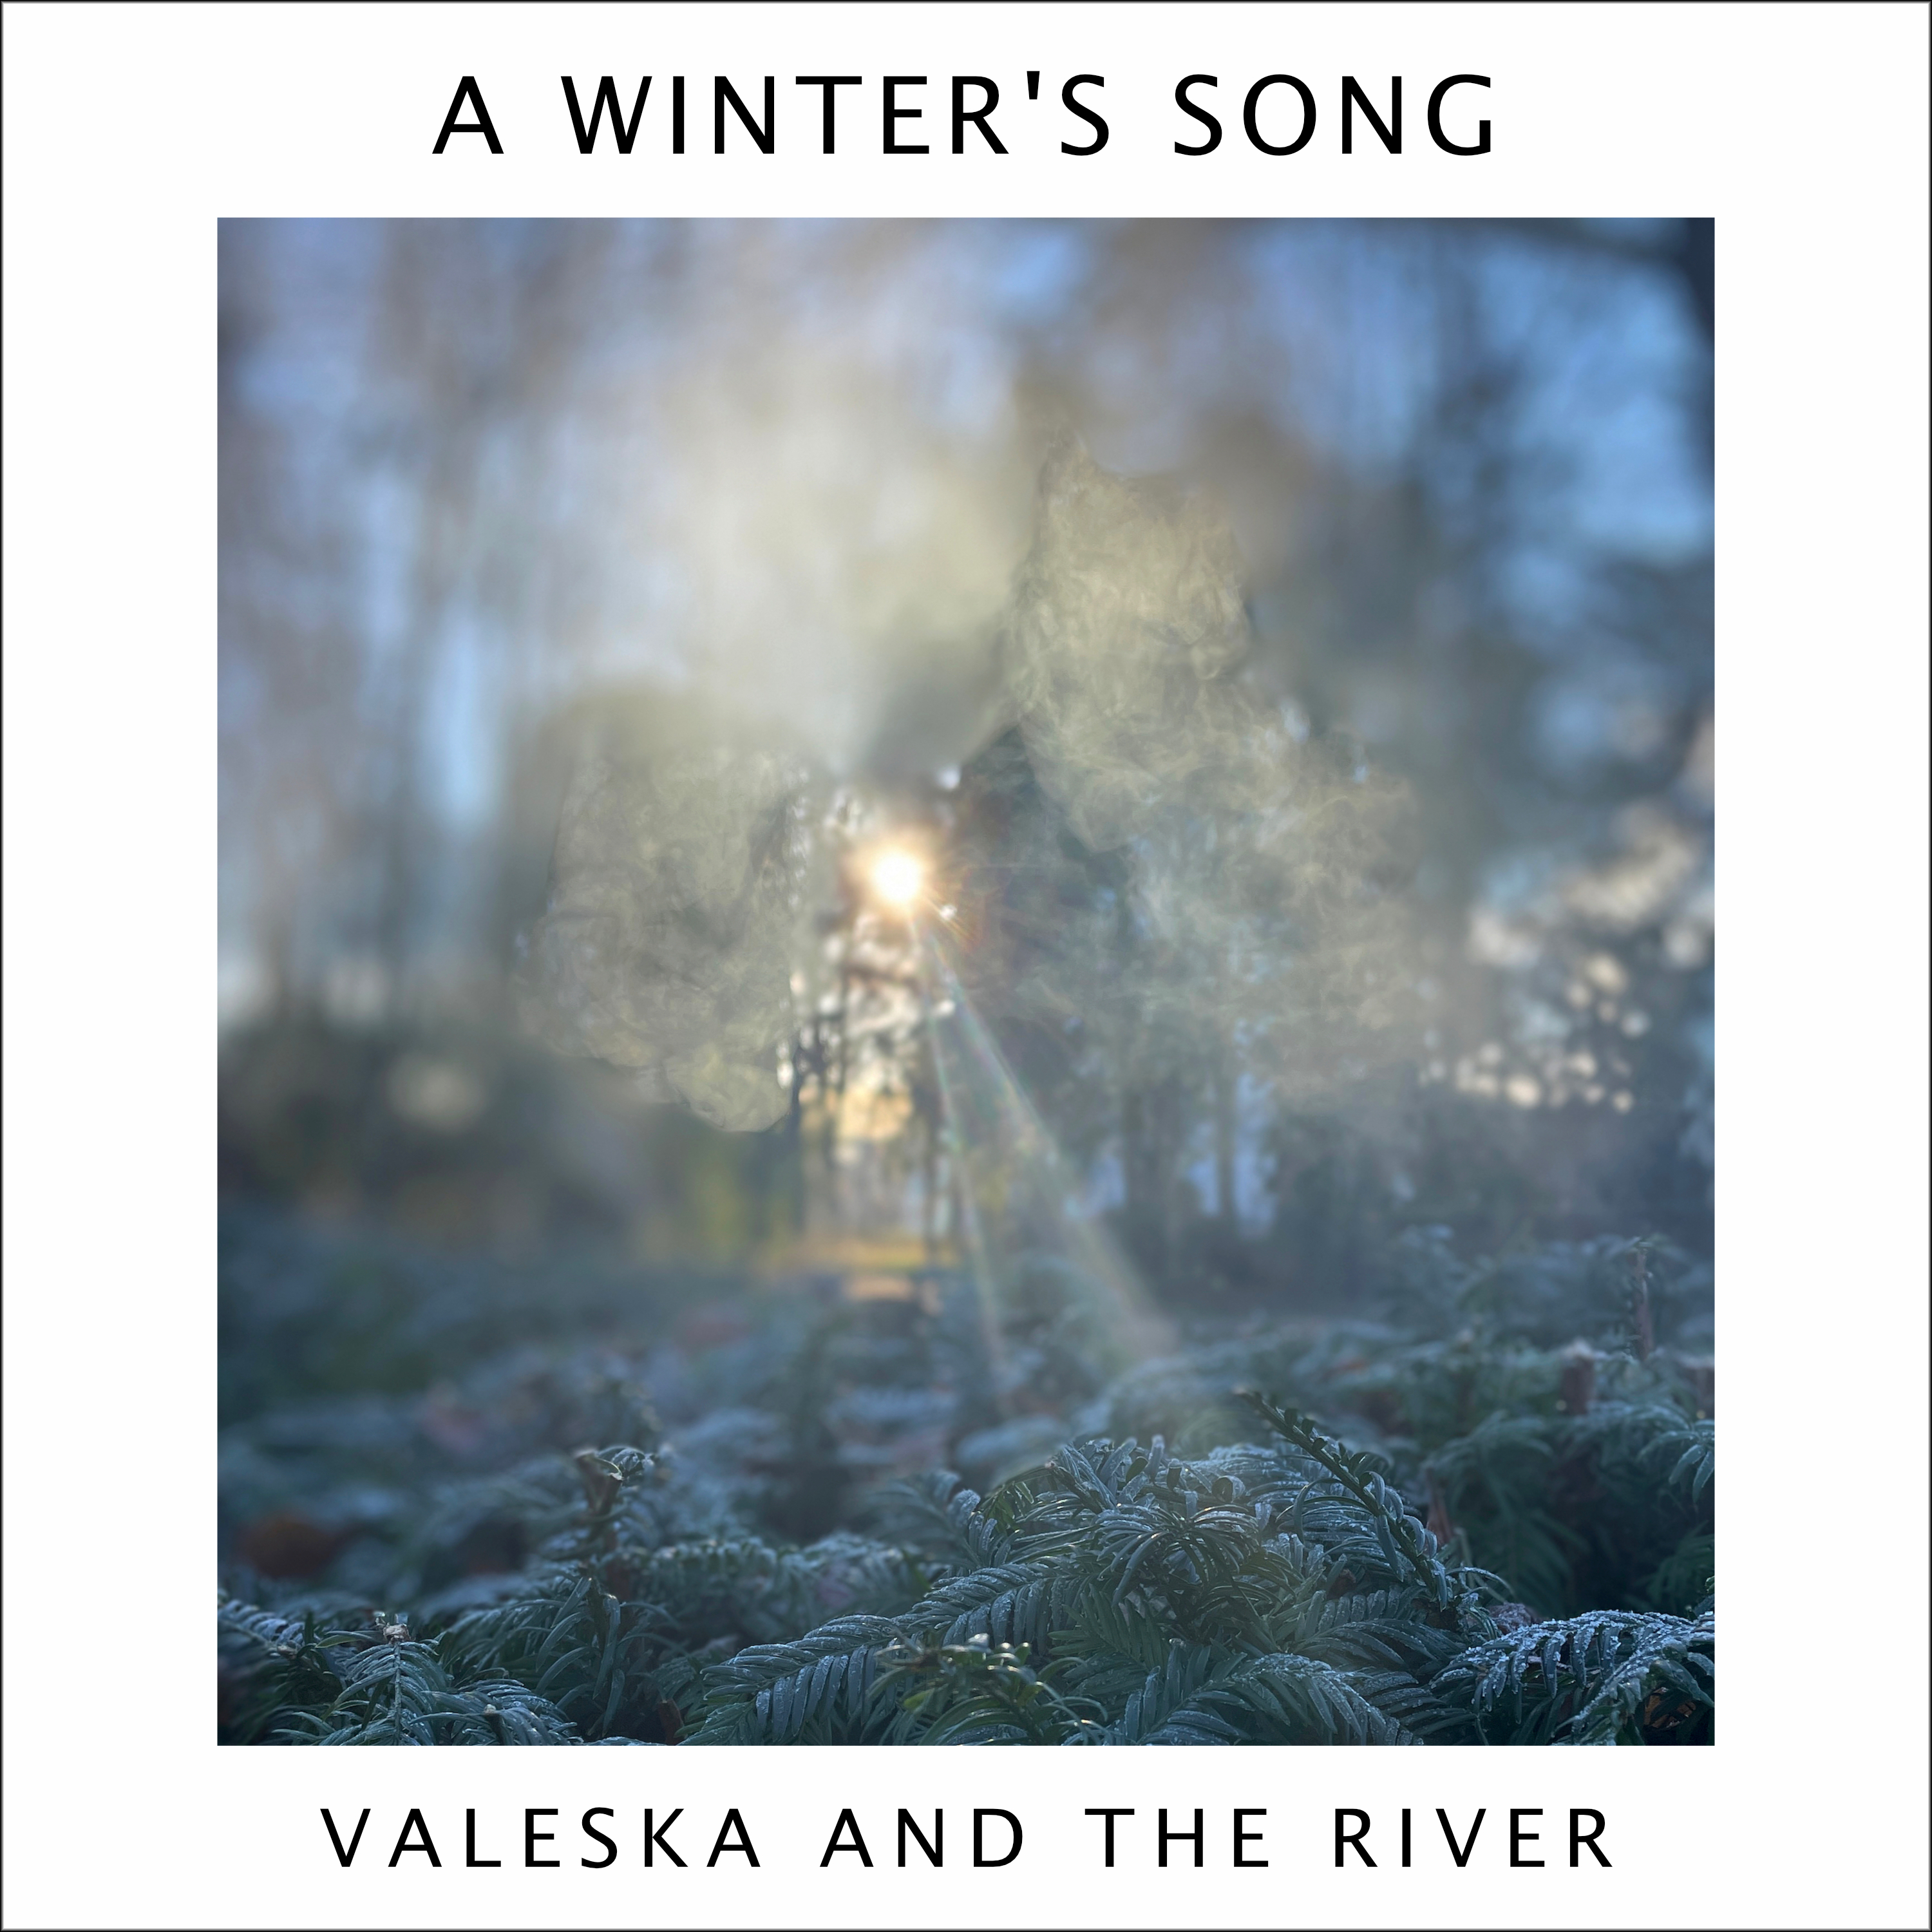 A Winter’s Song by Valeska and the River